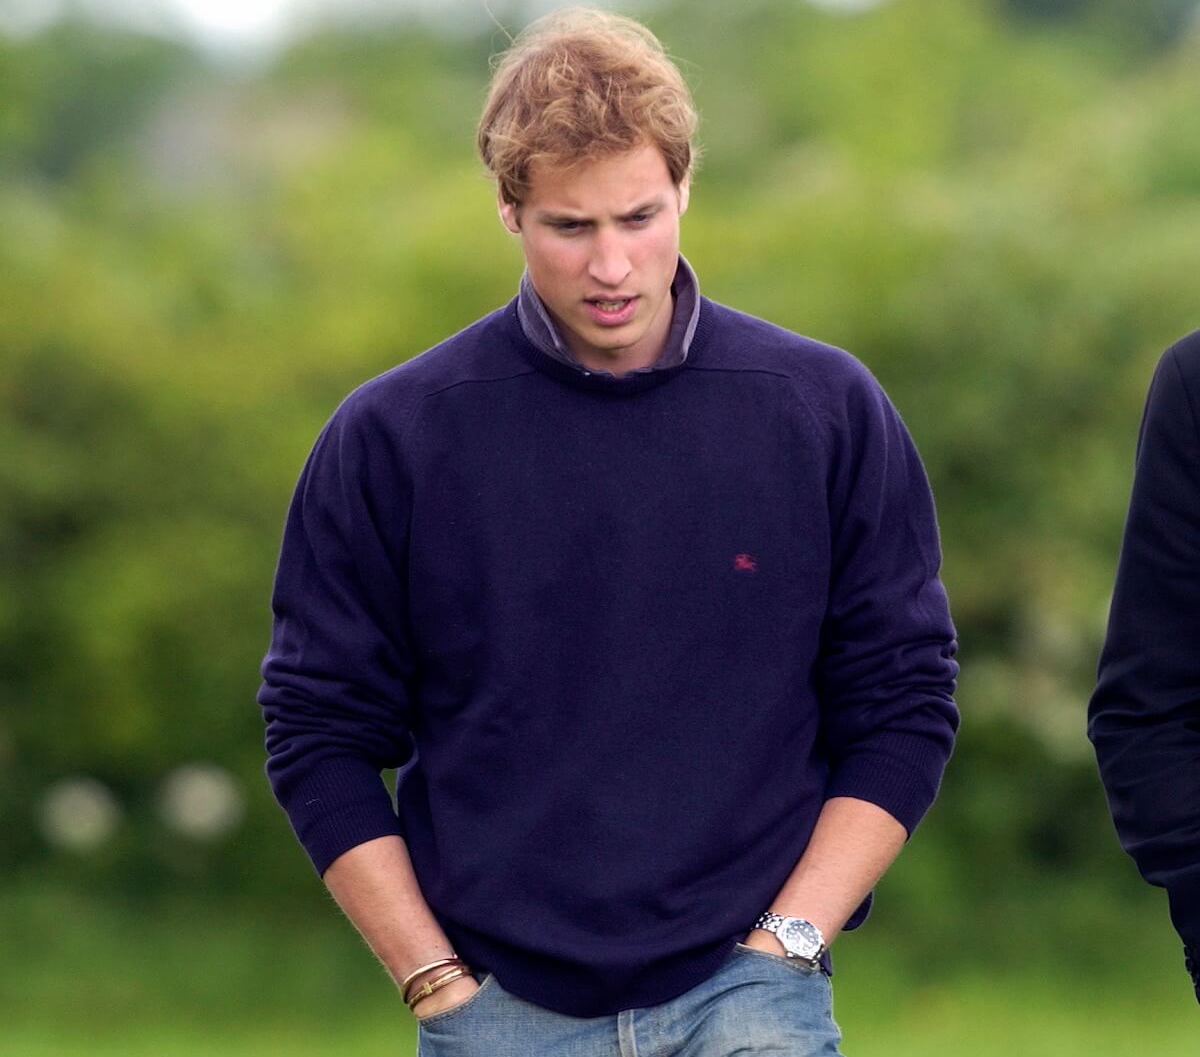 Prince William, who is a 'completely different person' based on his body language, per an expert, walks